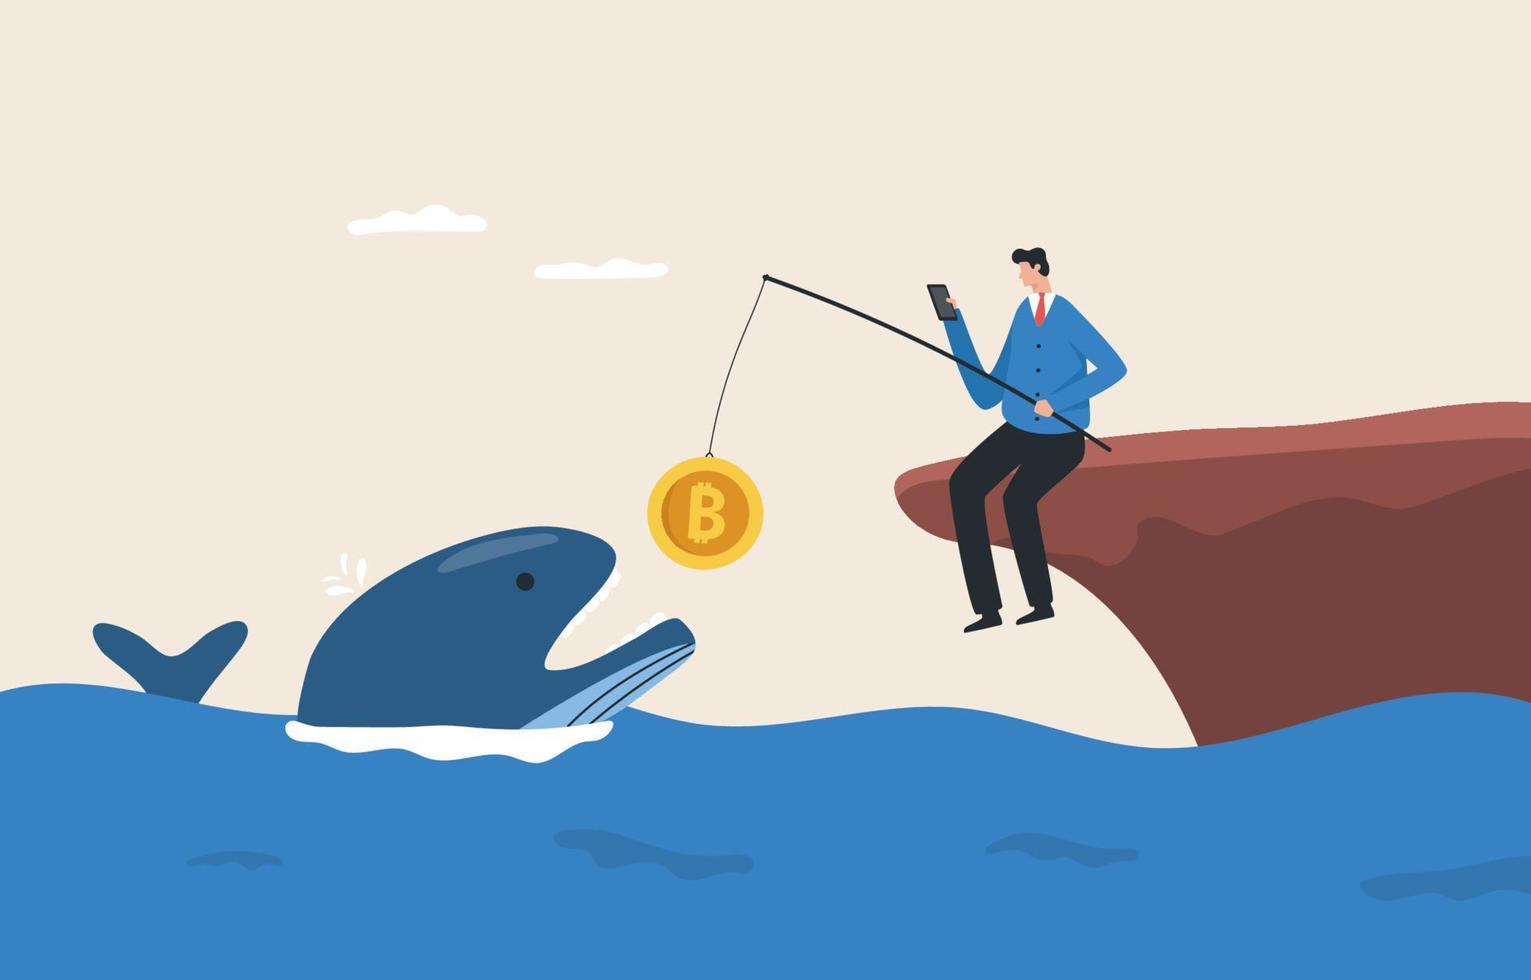 Bitcoin whale concept.  A large trader who owns a large amount of bitcoins or cryptocurrencies. Major holders in influencing market prices fluctuate. vector